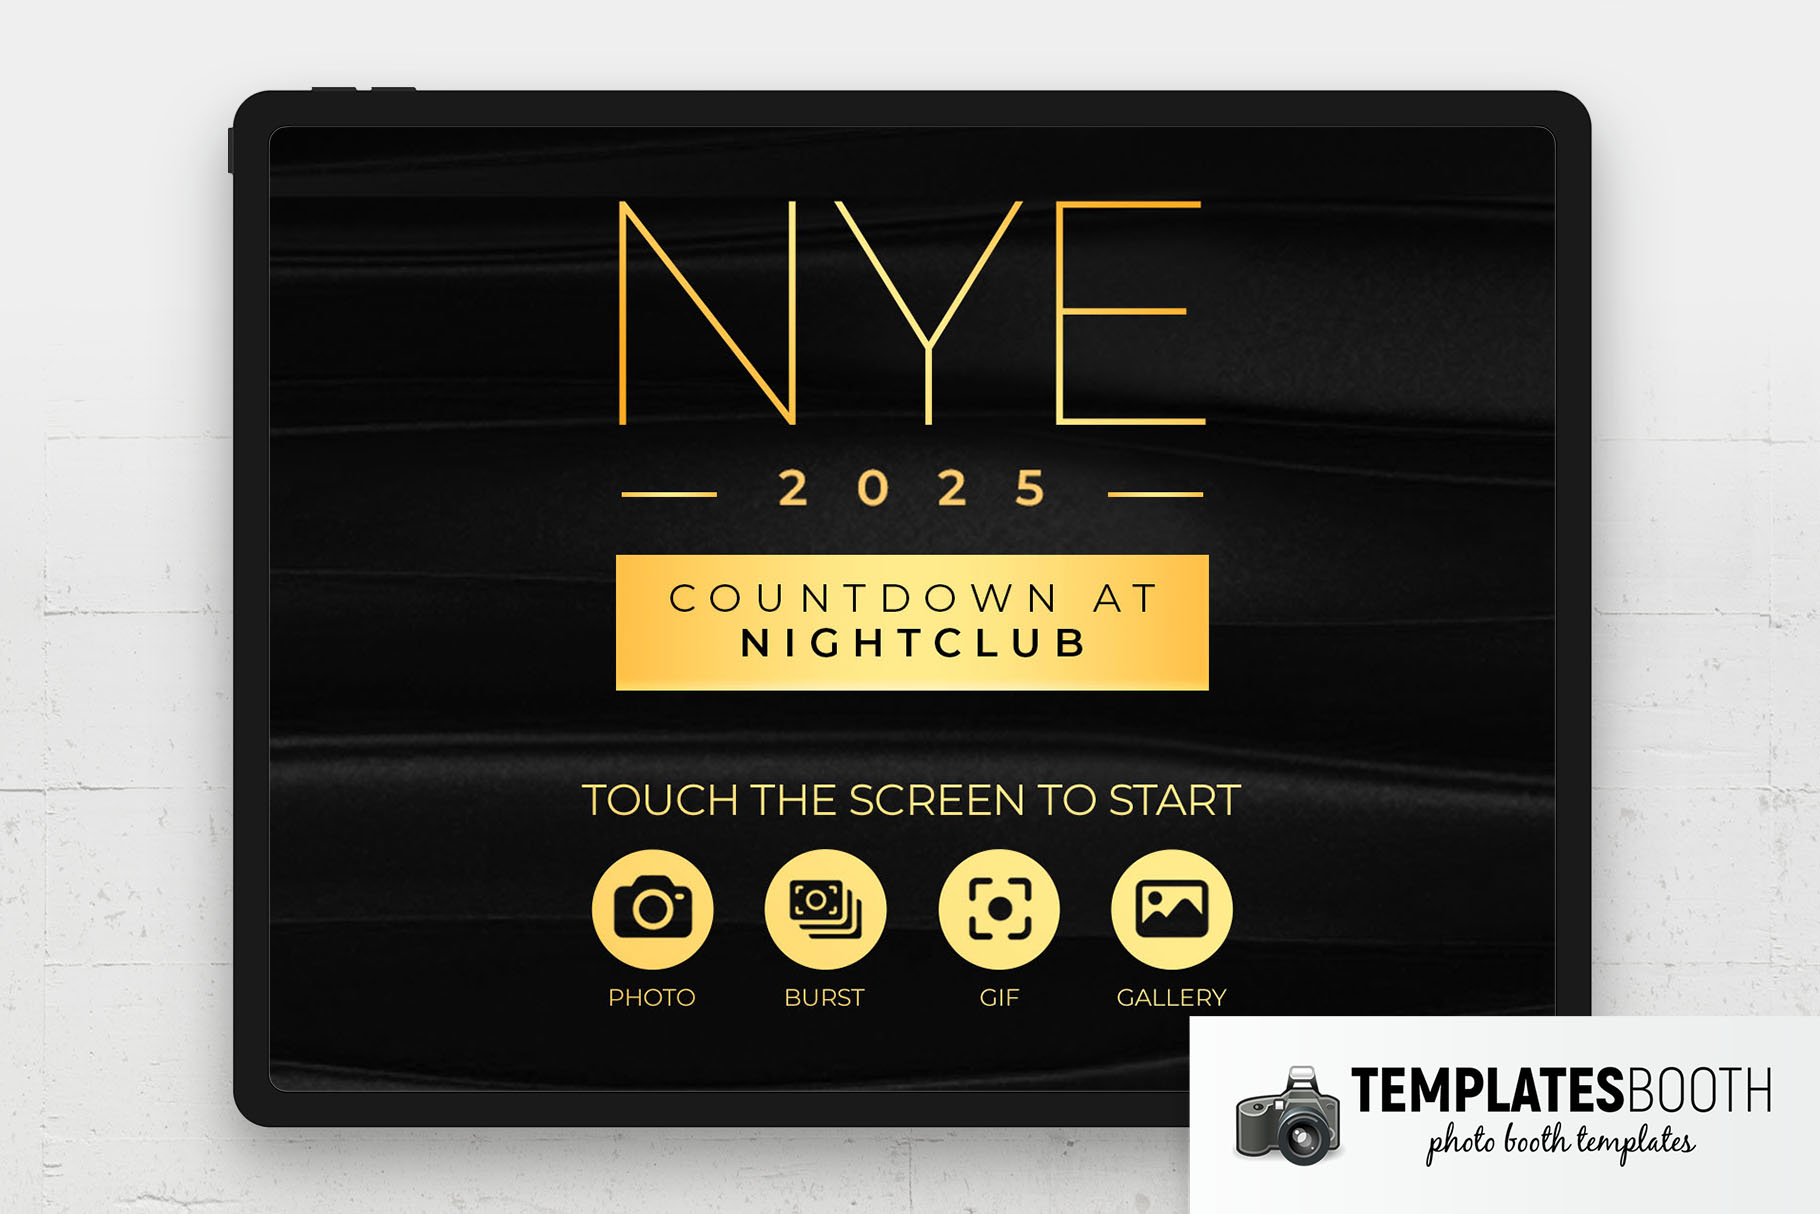 NYE Party Photo Booth Welcome Screen